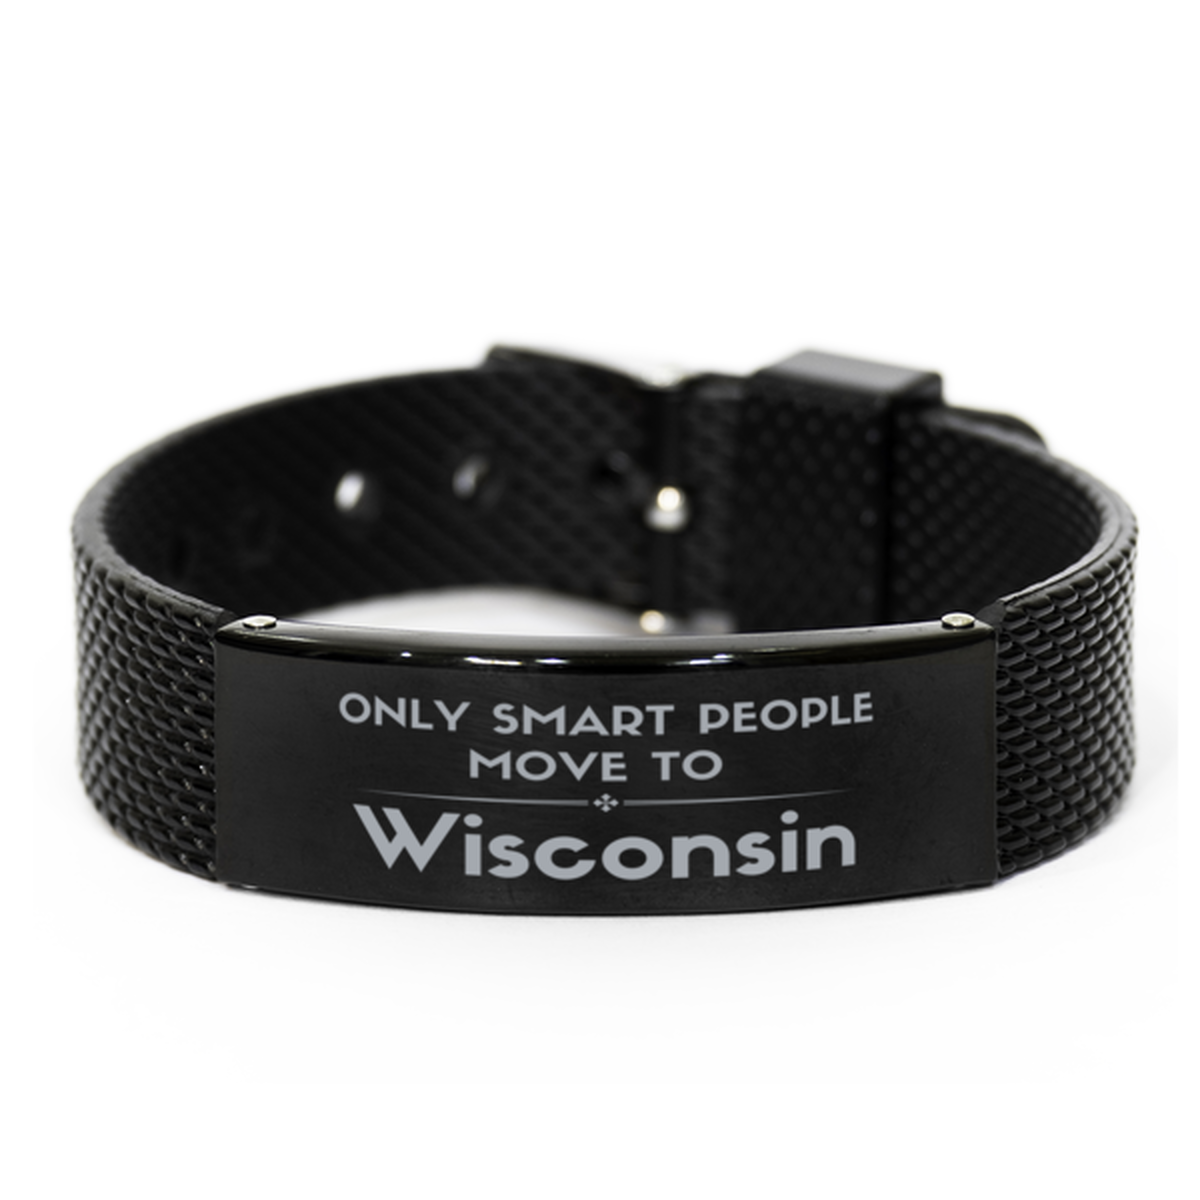 Only smart people move to Wisconsin Black Shark Mesh Bracelet, Gag Gifts For Wisconsin, Move to Wisconsin Gifts for Friends Coworker Funny Saying Quote